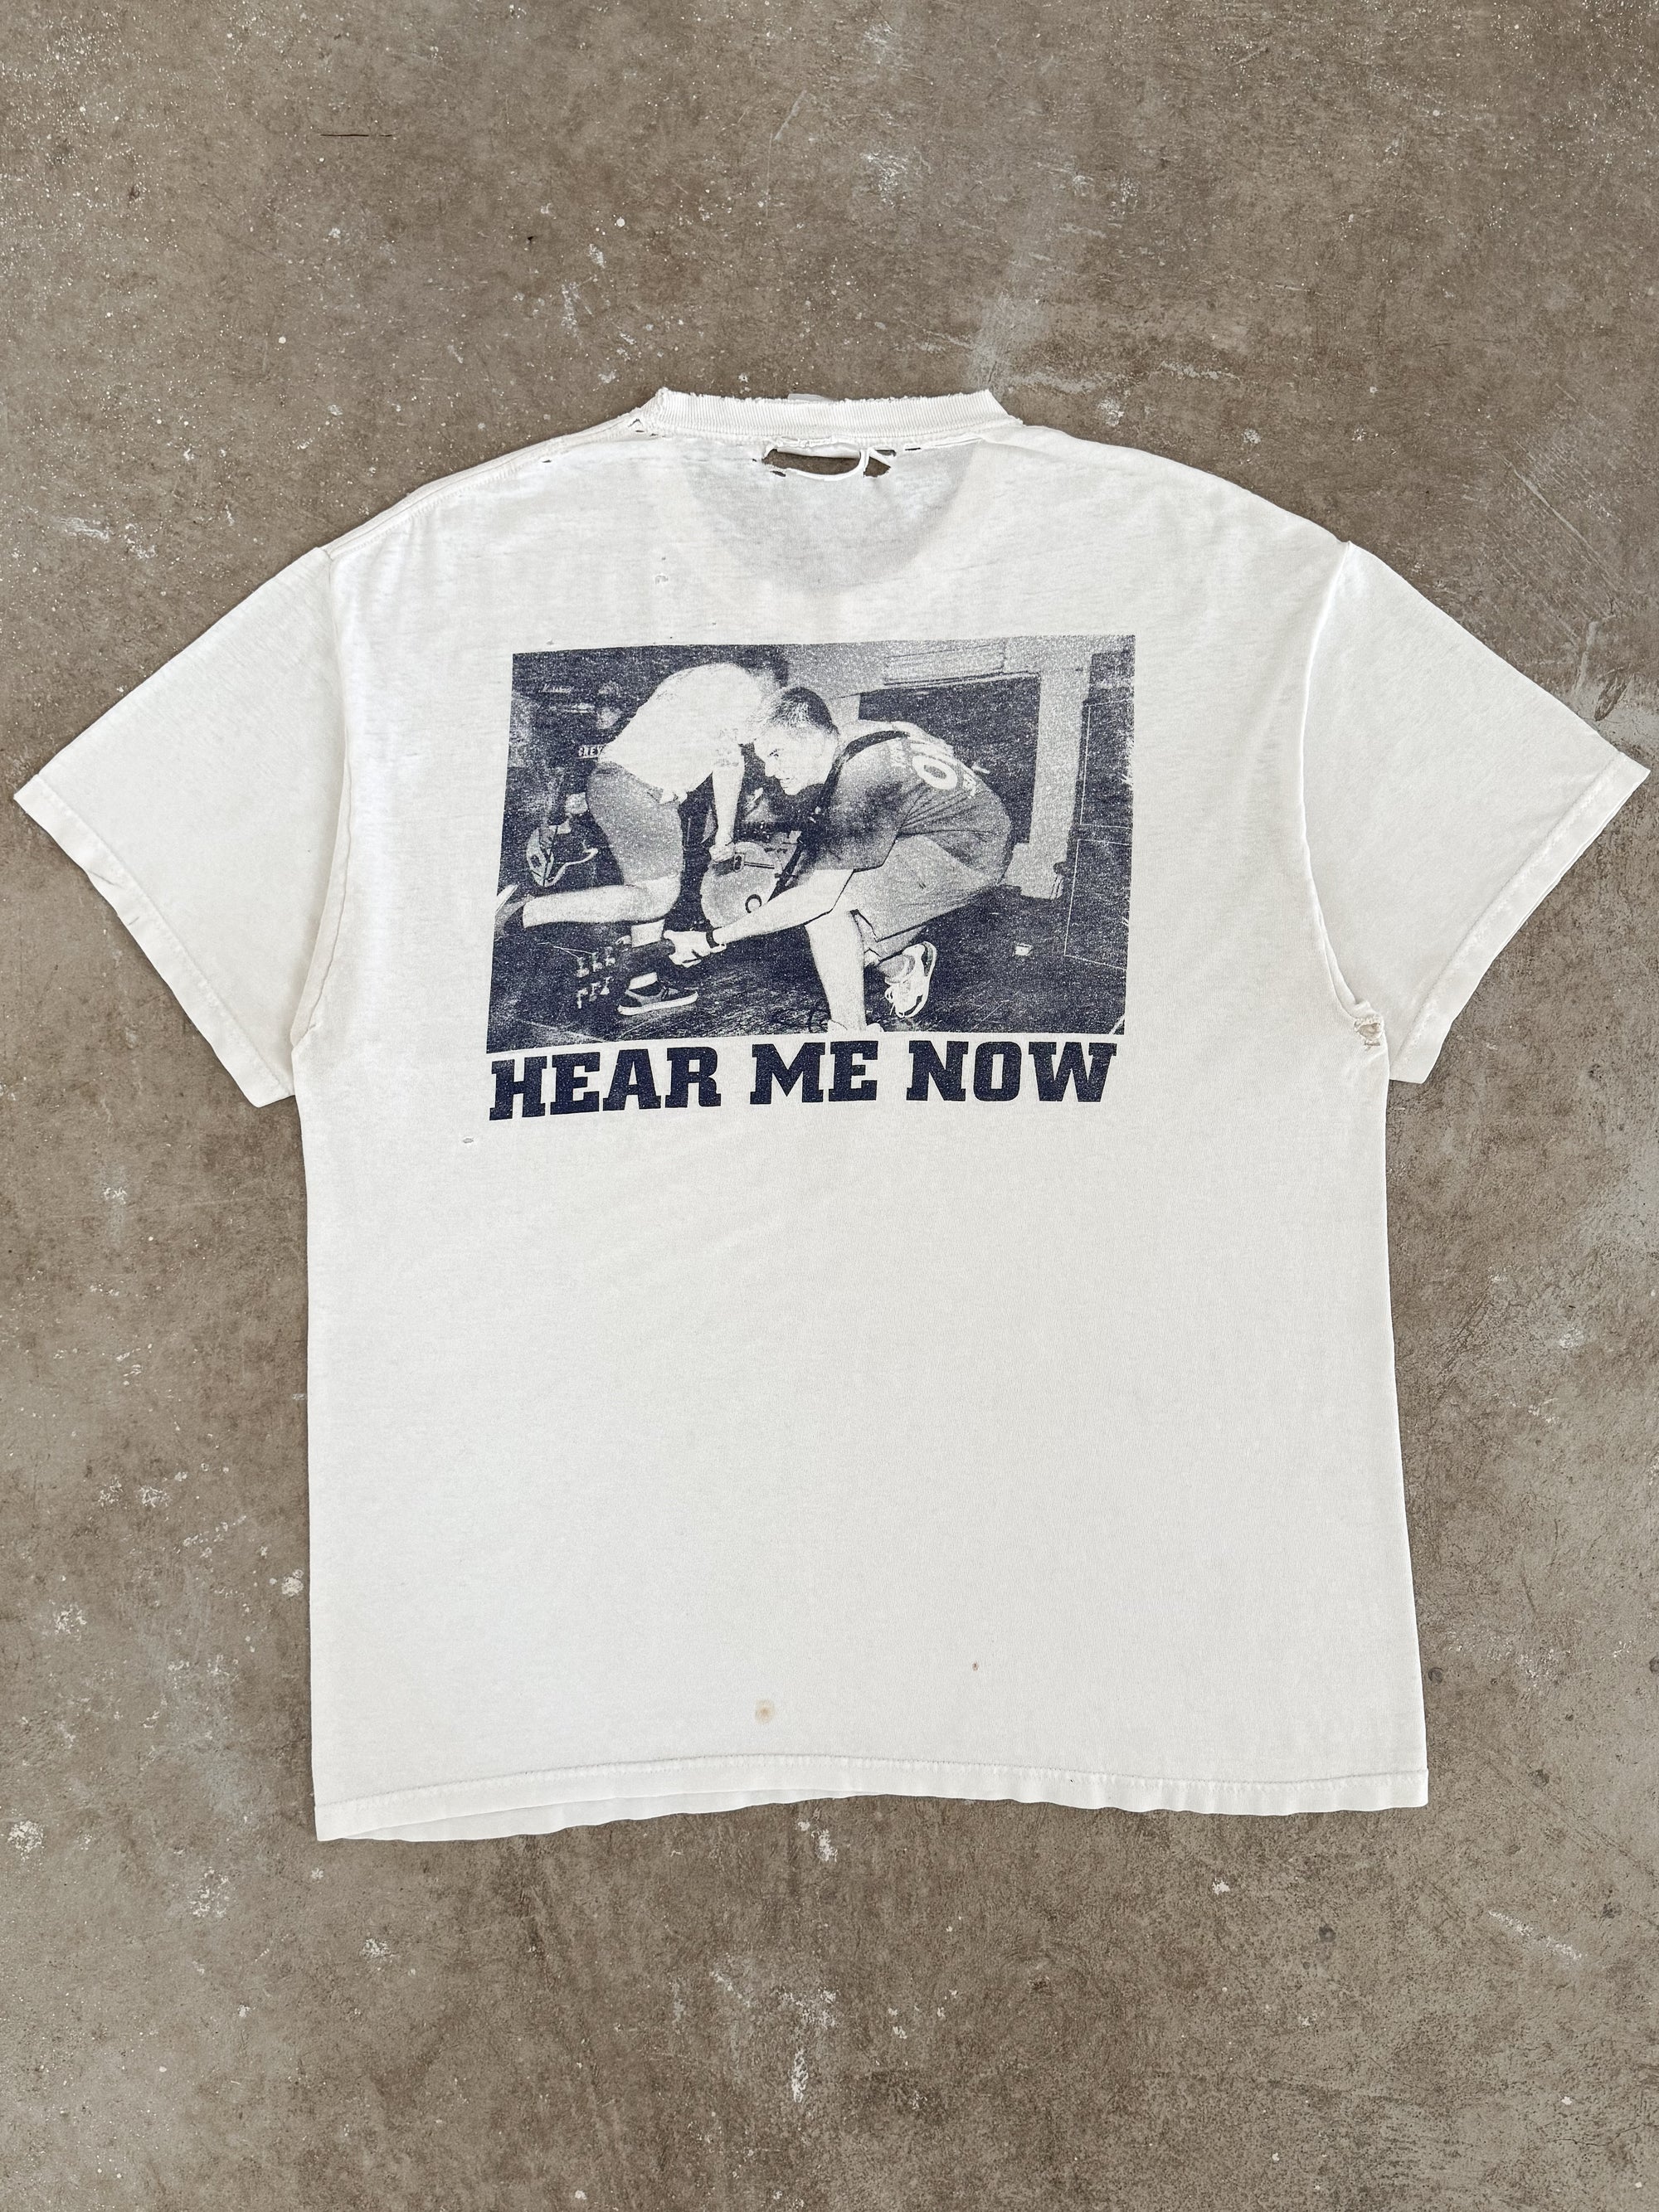 2010s "Hear Me Now" Distressed Mindset Band Tee (L)